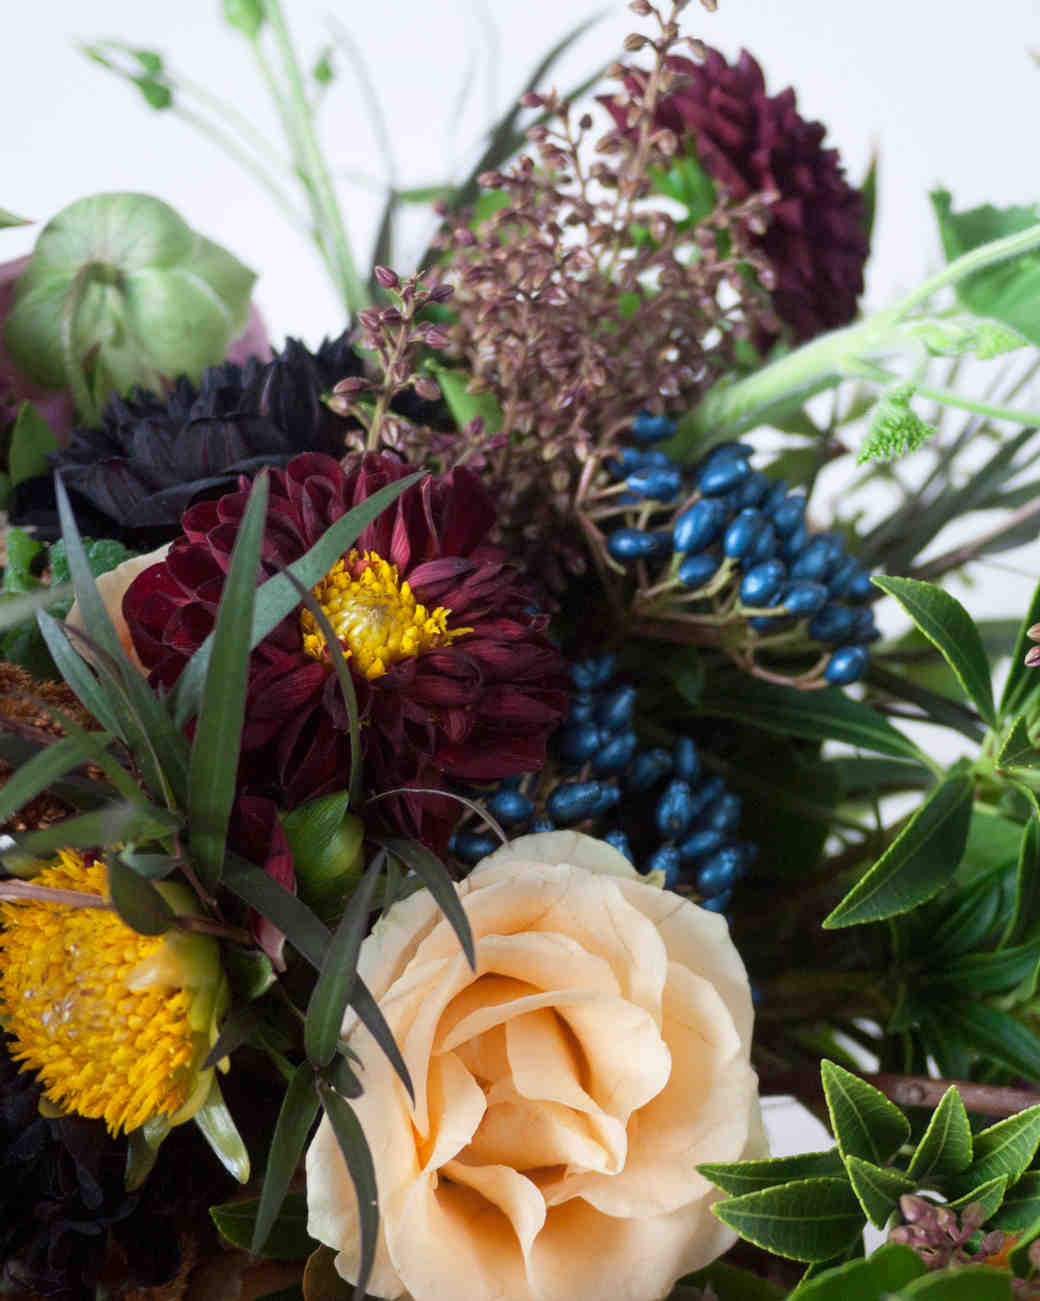 Fall Wedding Flowers In Season
 11 In Season Flowers That Are Perfect for a Fall Wedding